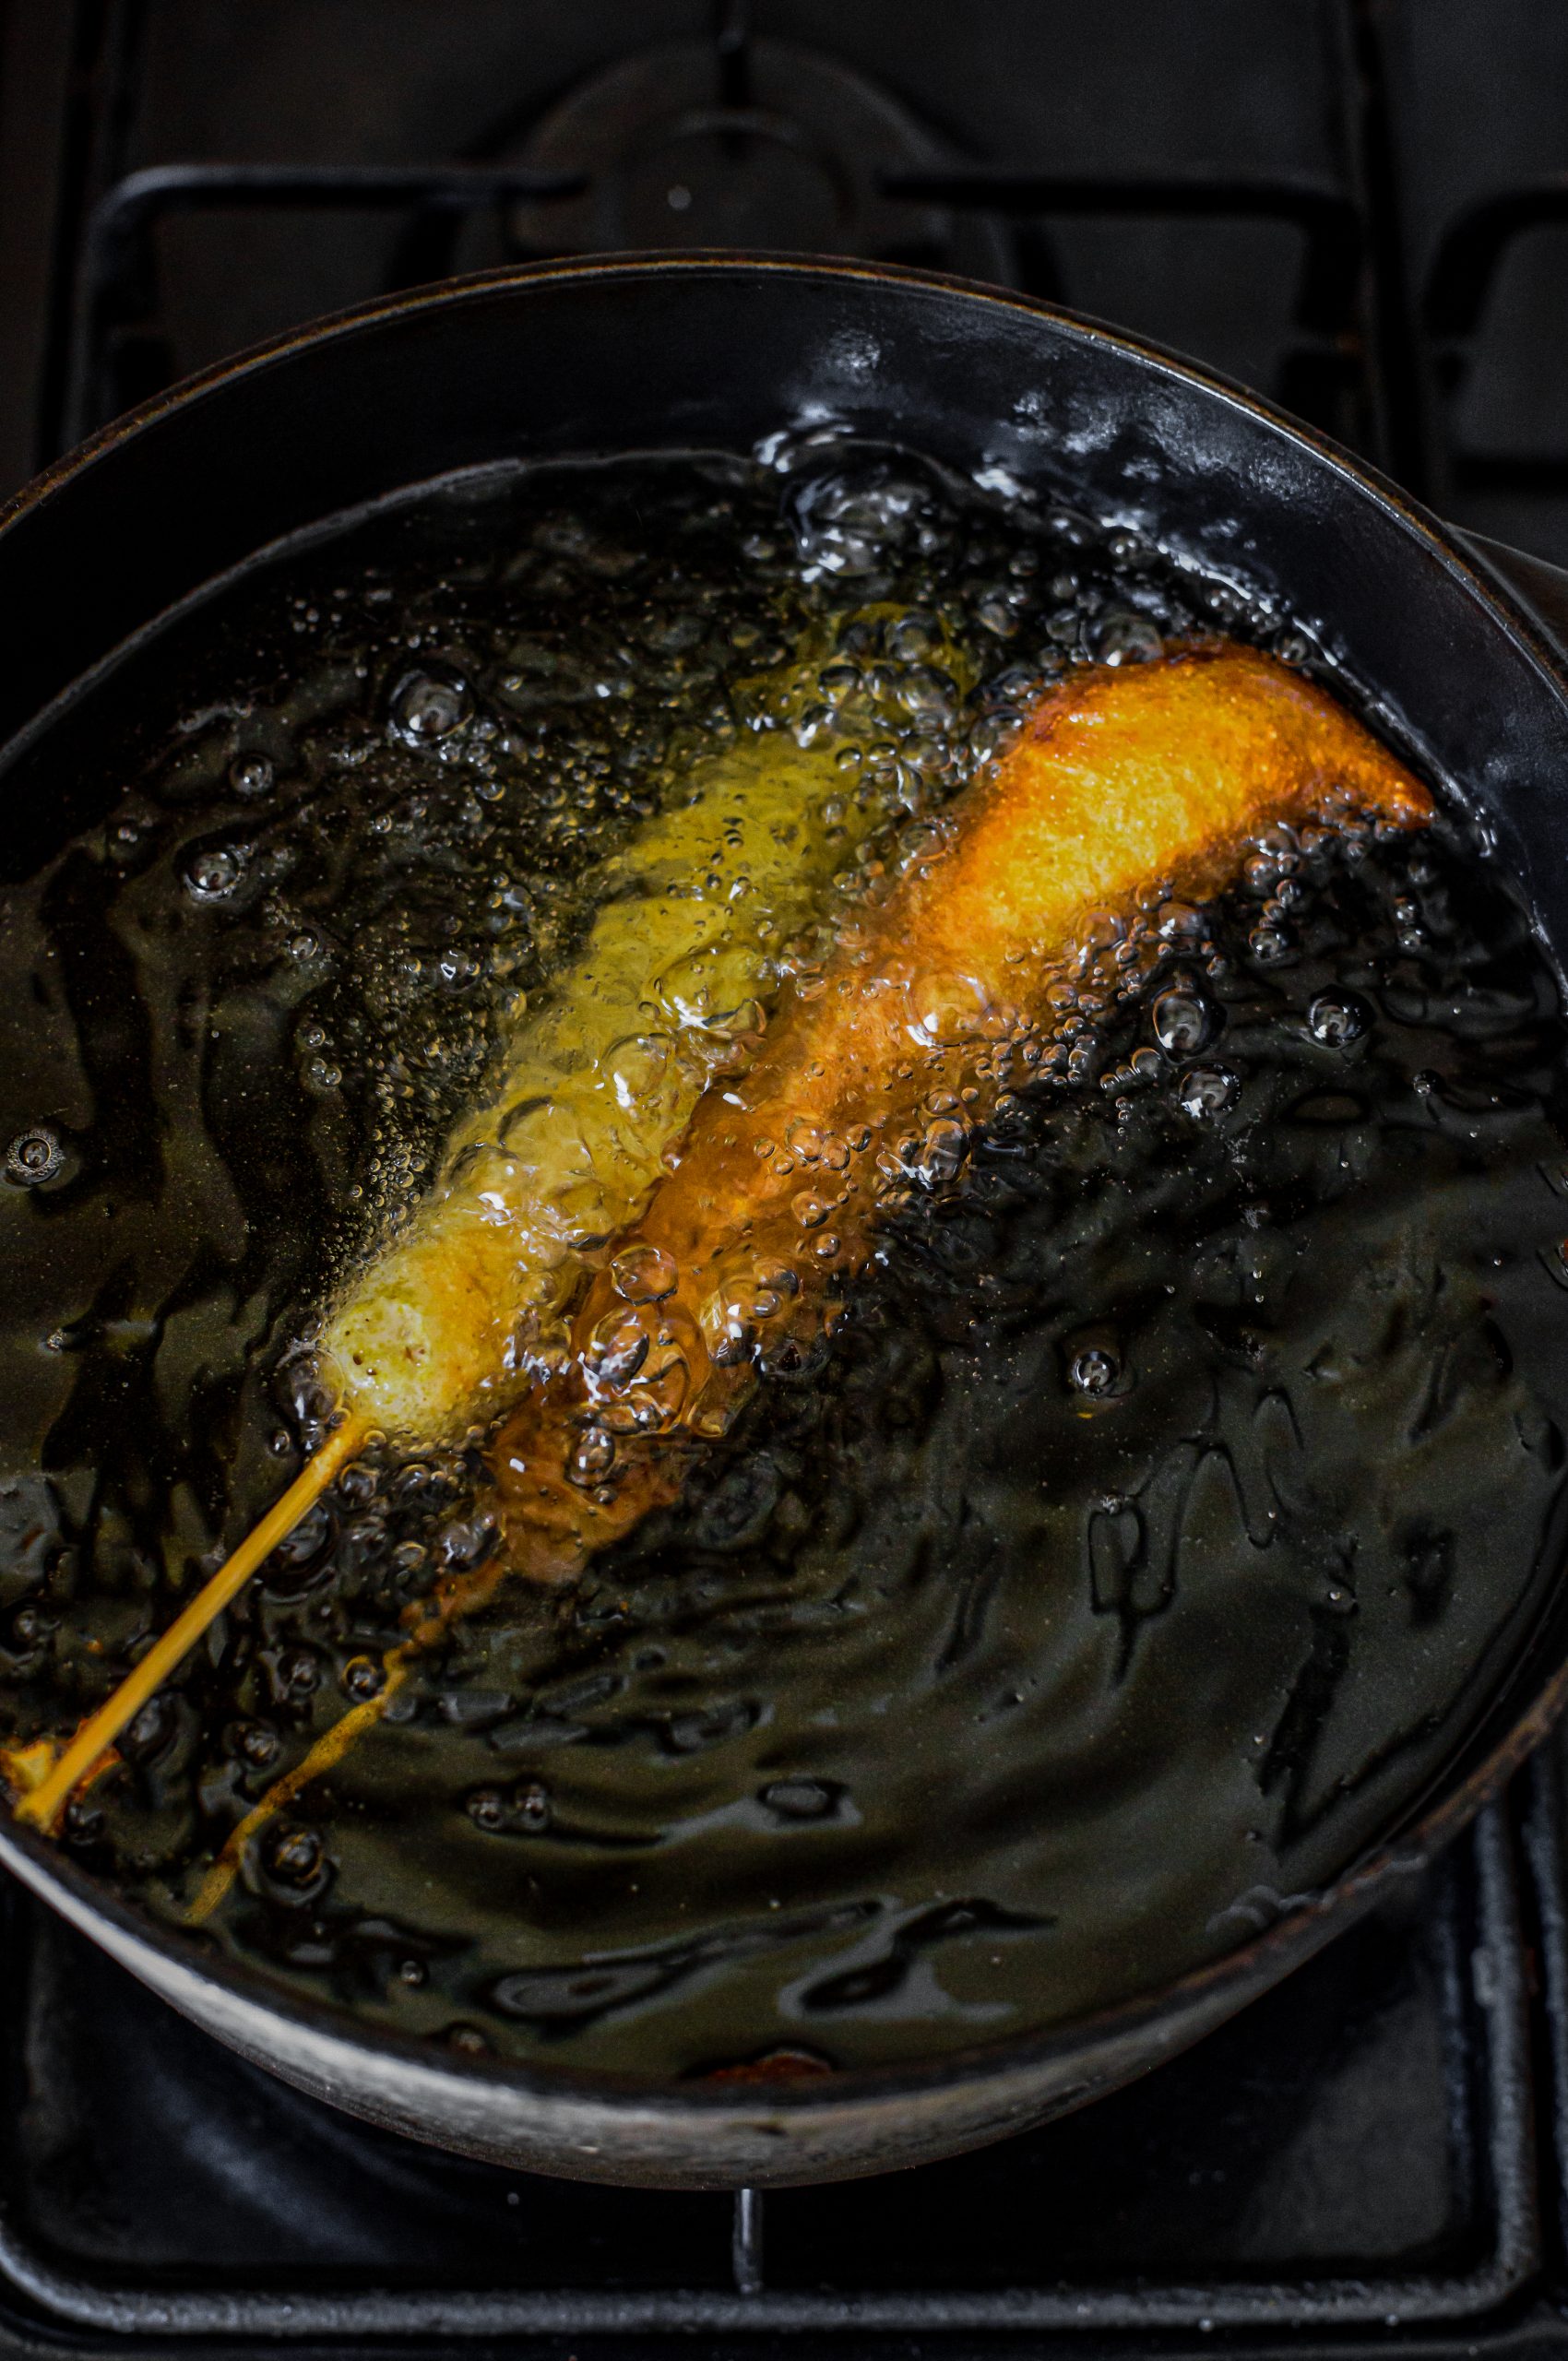 Place the battered corn dogs into the heated oil, and cook for 2-3 minutes until golden brown. 